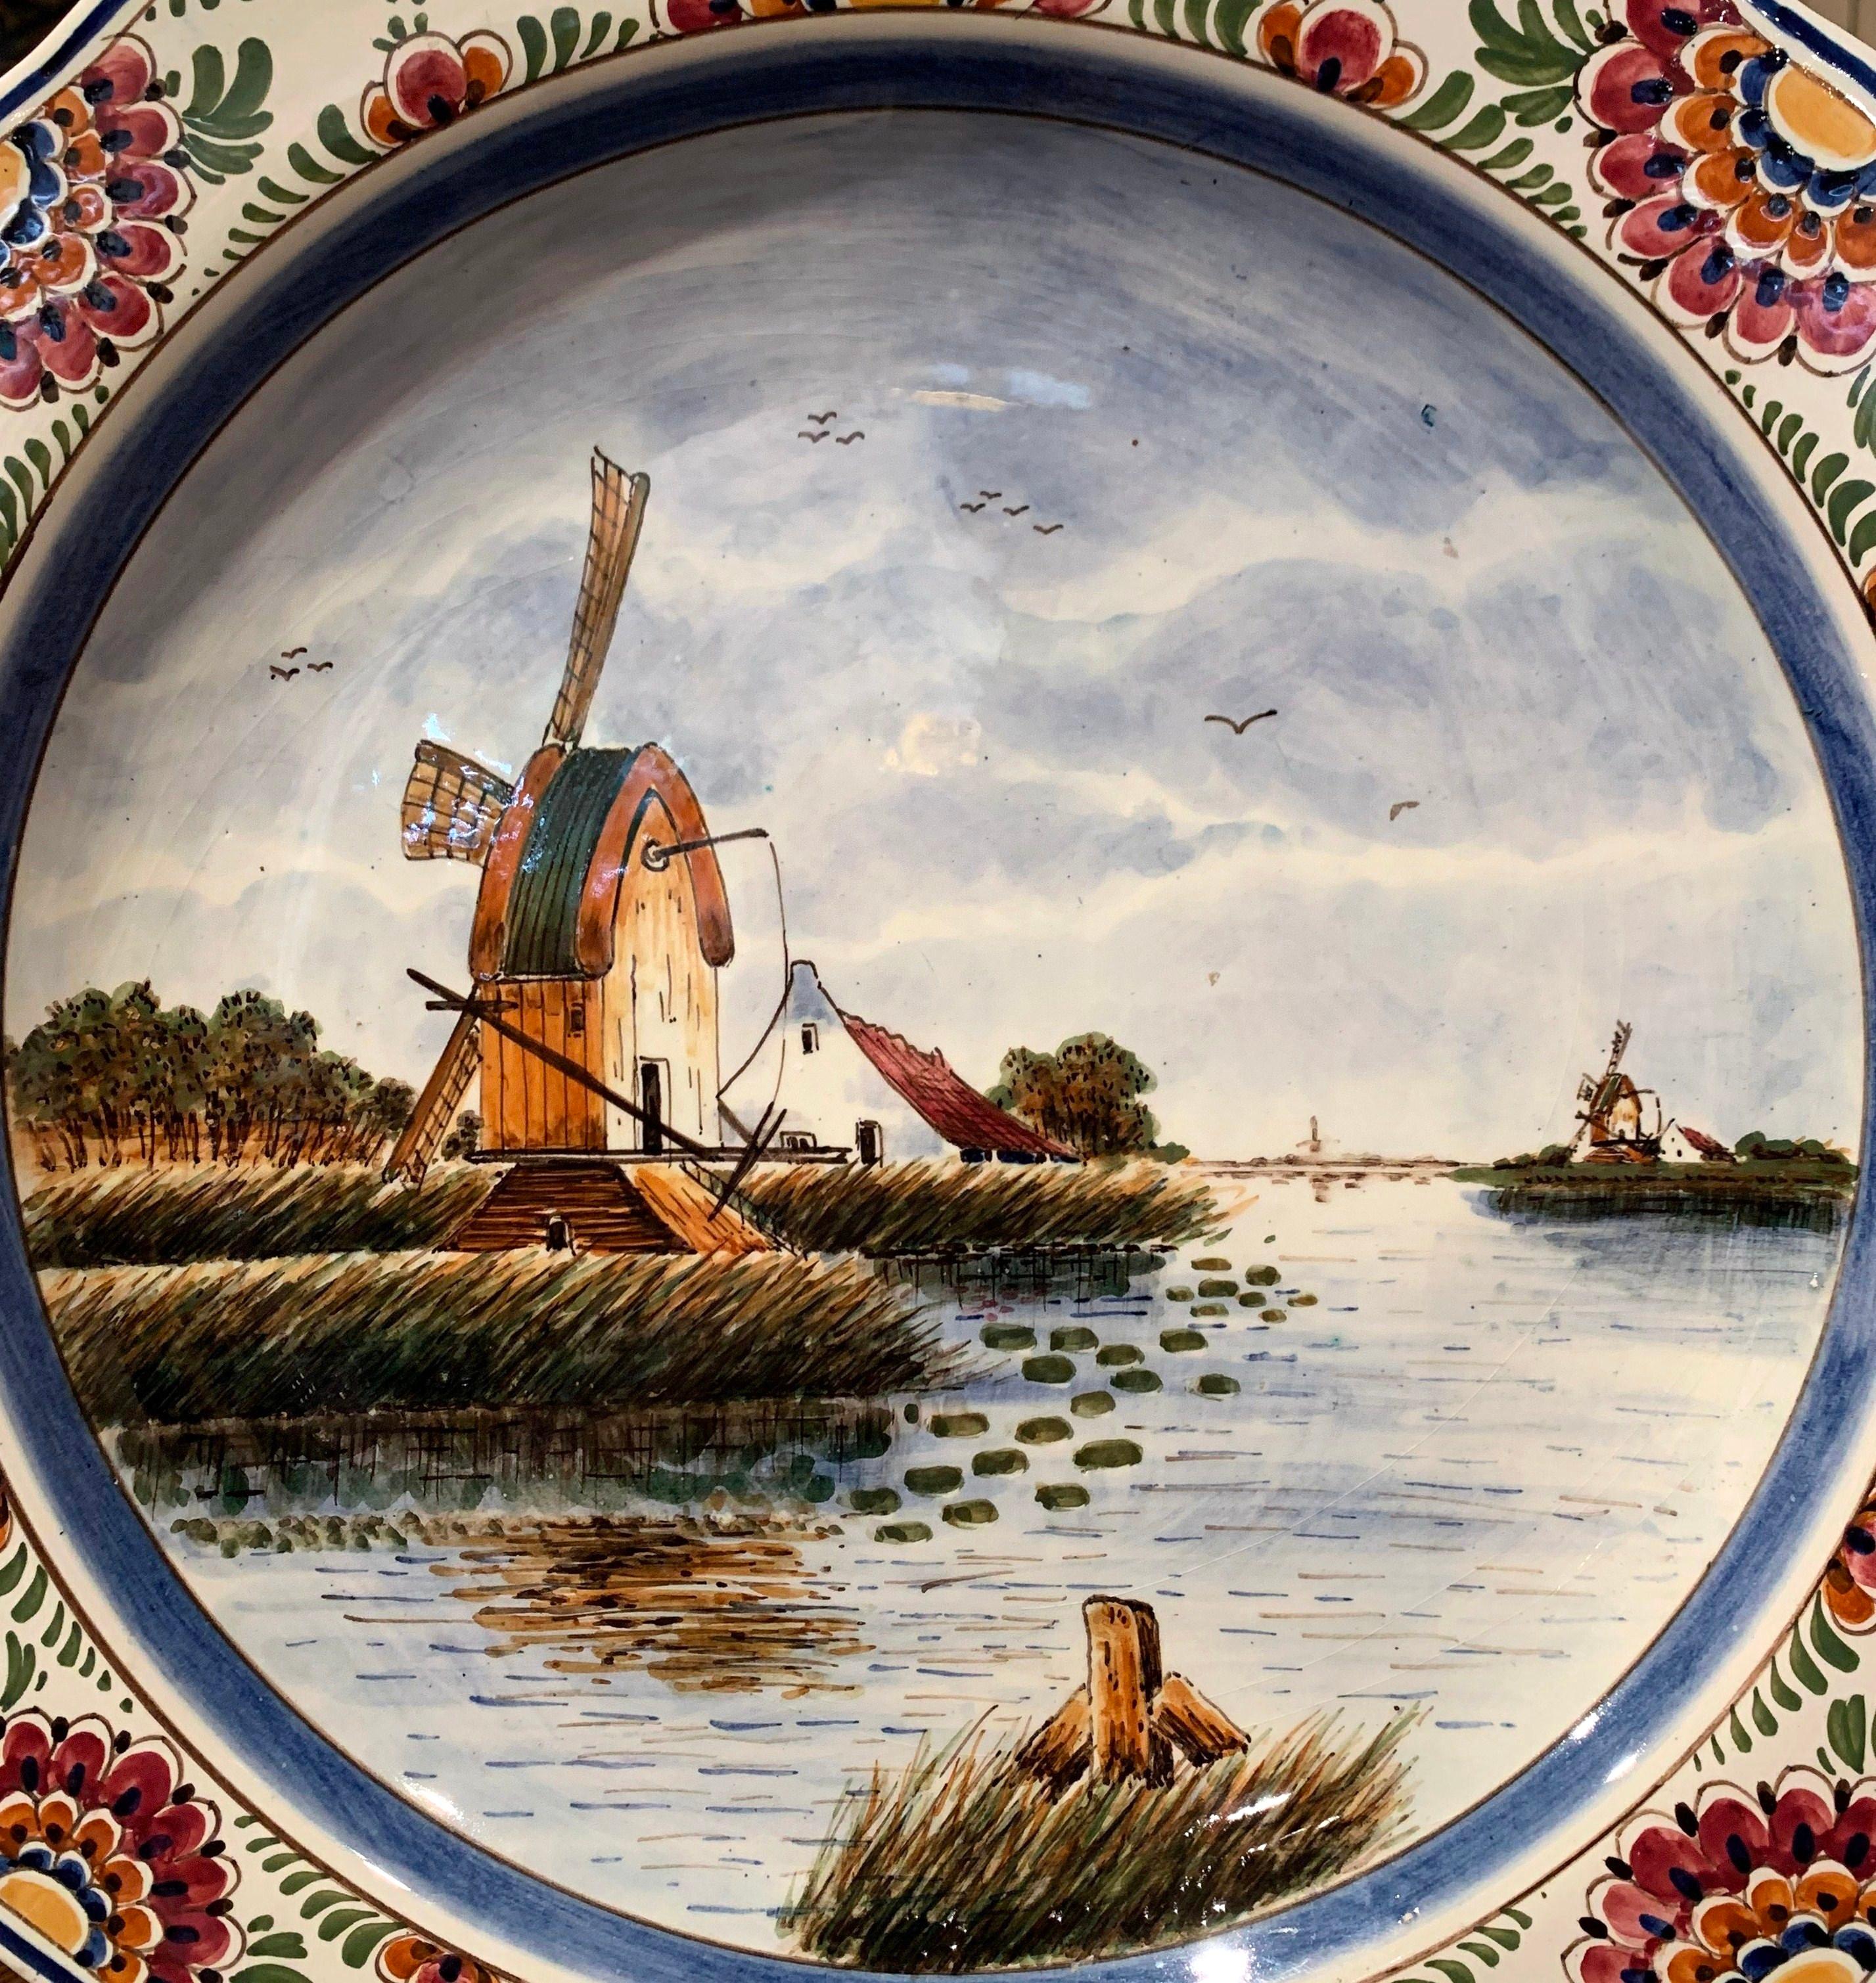 This large colorful charger was crafted in Holland, circa 1930, round in shape, the faience dish features traditional hand painted delft decor, including windmill, farmhouse and lake, it is further embellished with floral decor around the rim. The